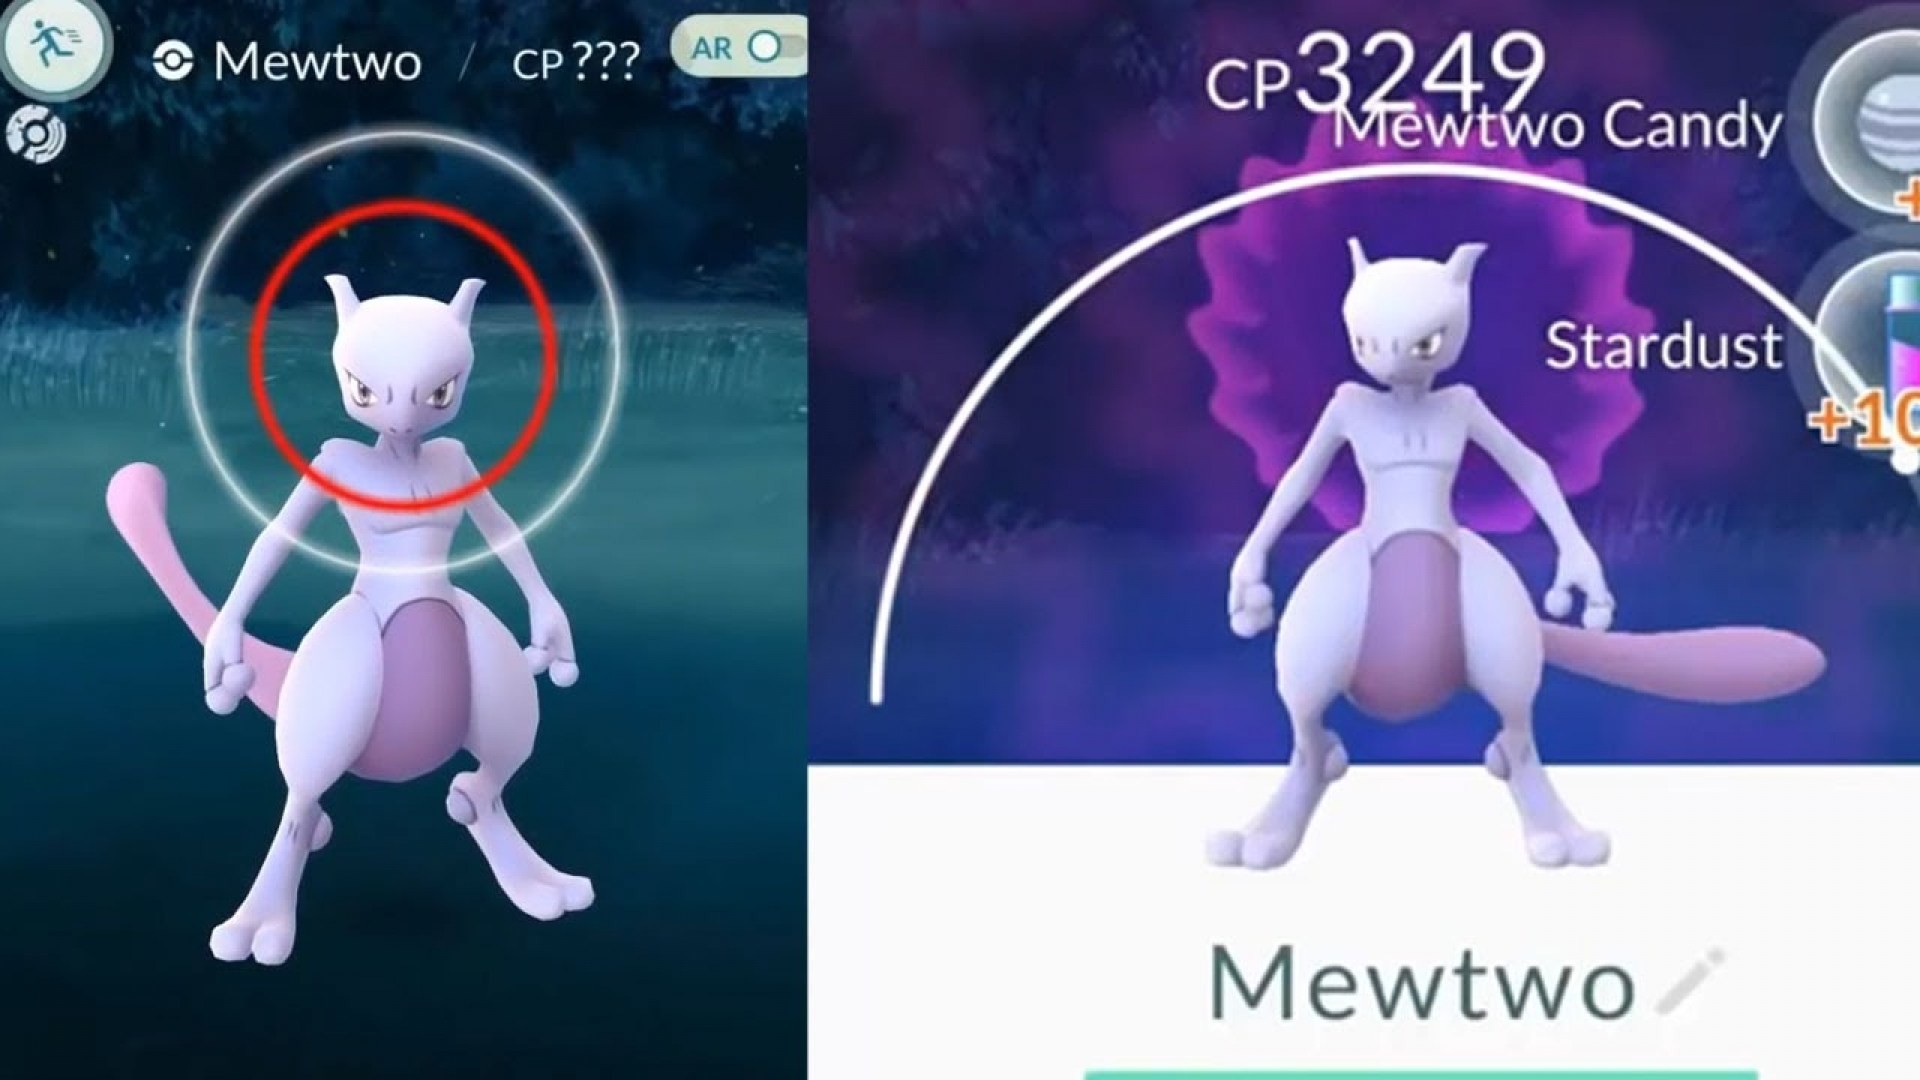 Pictures Of Pokemon Go Game Characters Mewtwo And Mew 1280Ã720 HD Wallpapers  1920Ã1080